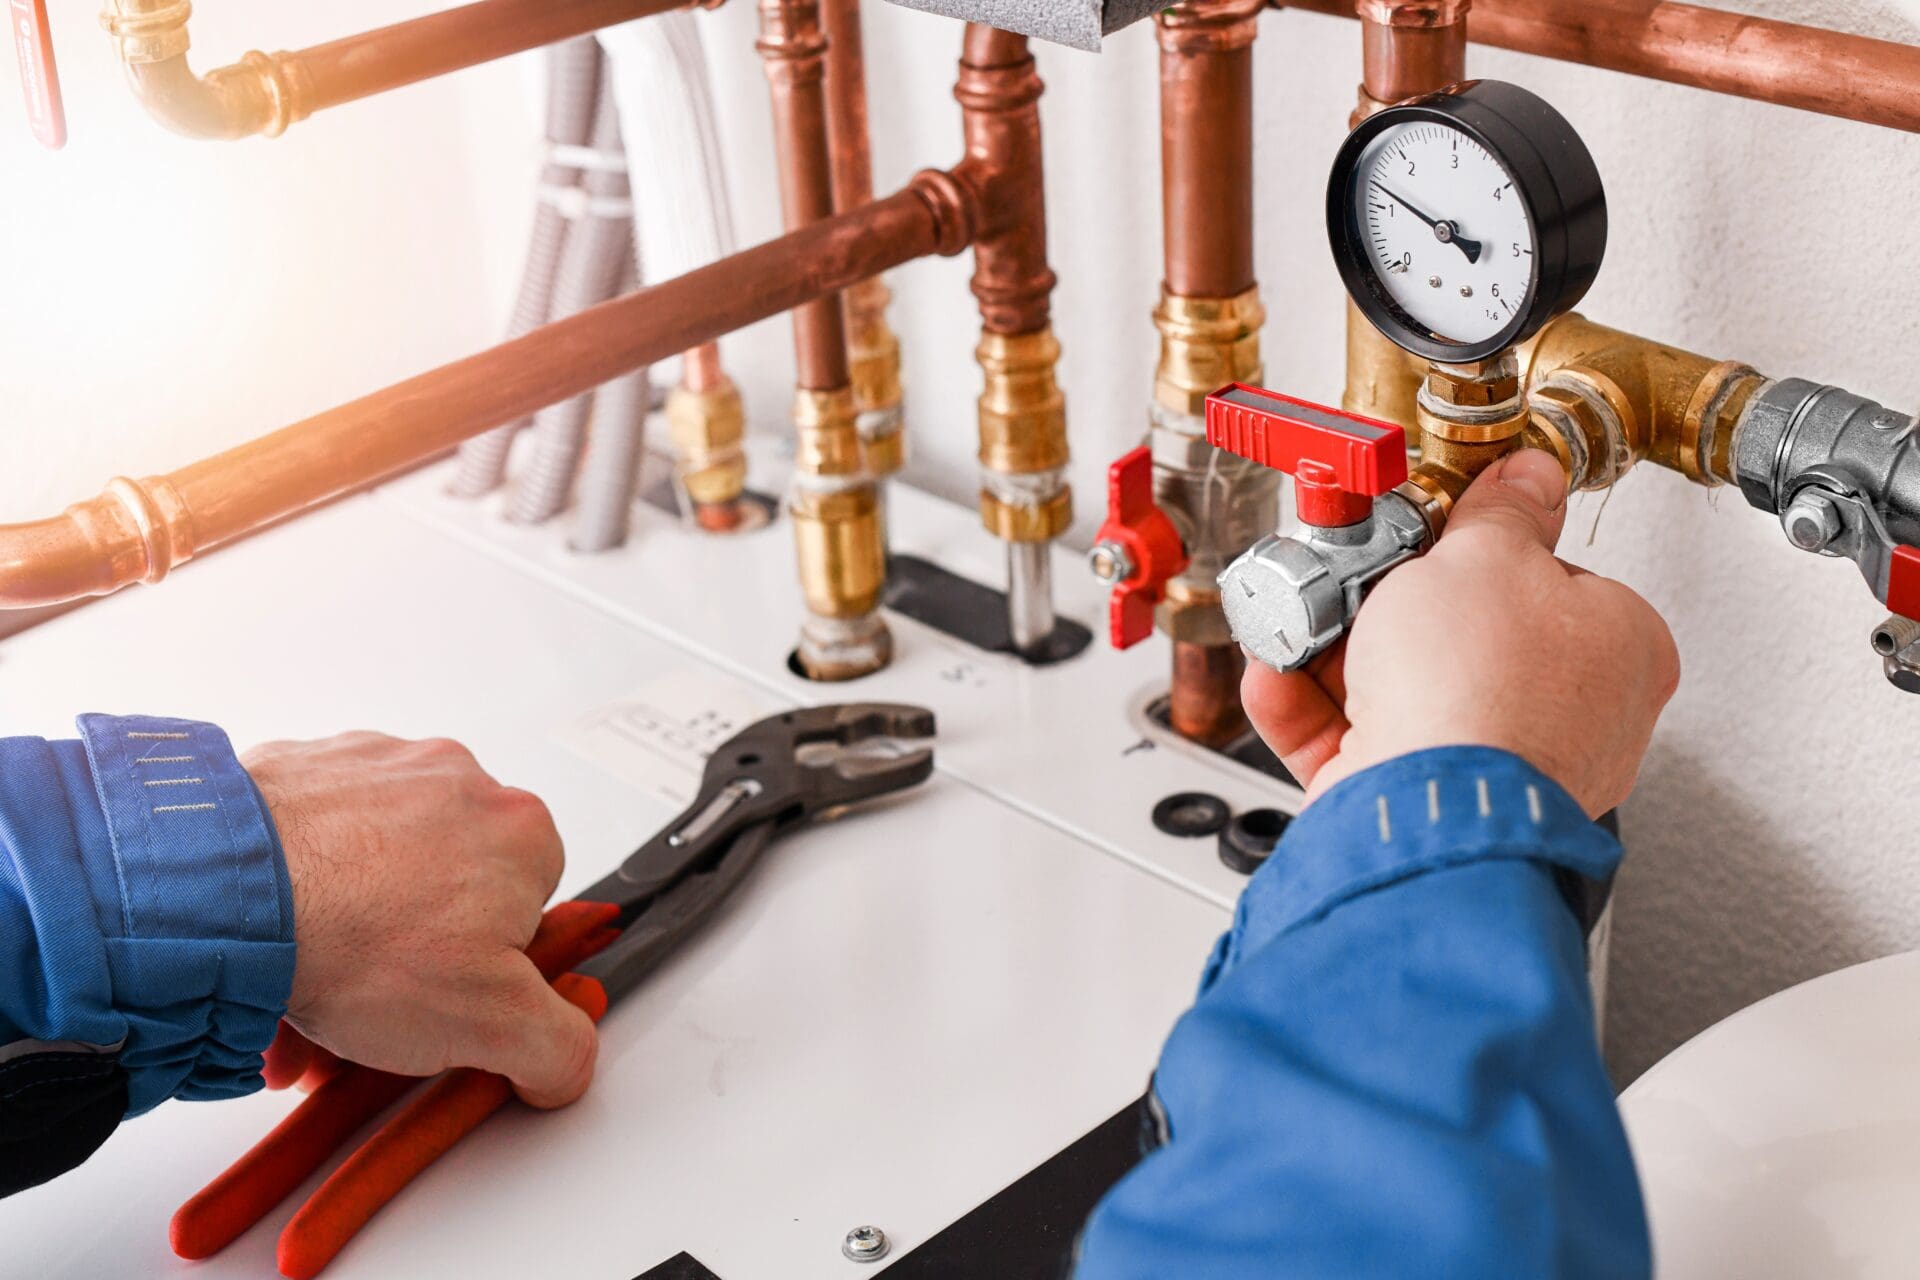 Man adjusting water gauge on copper pipes with wrench in other hand